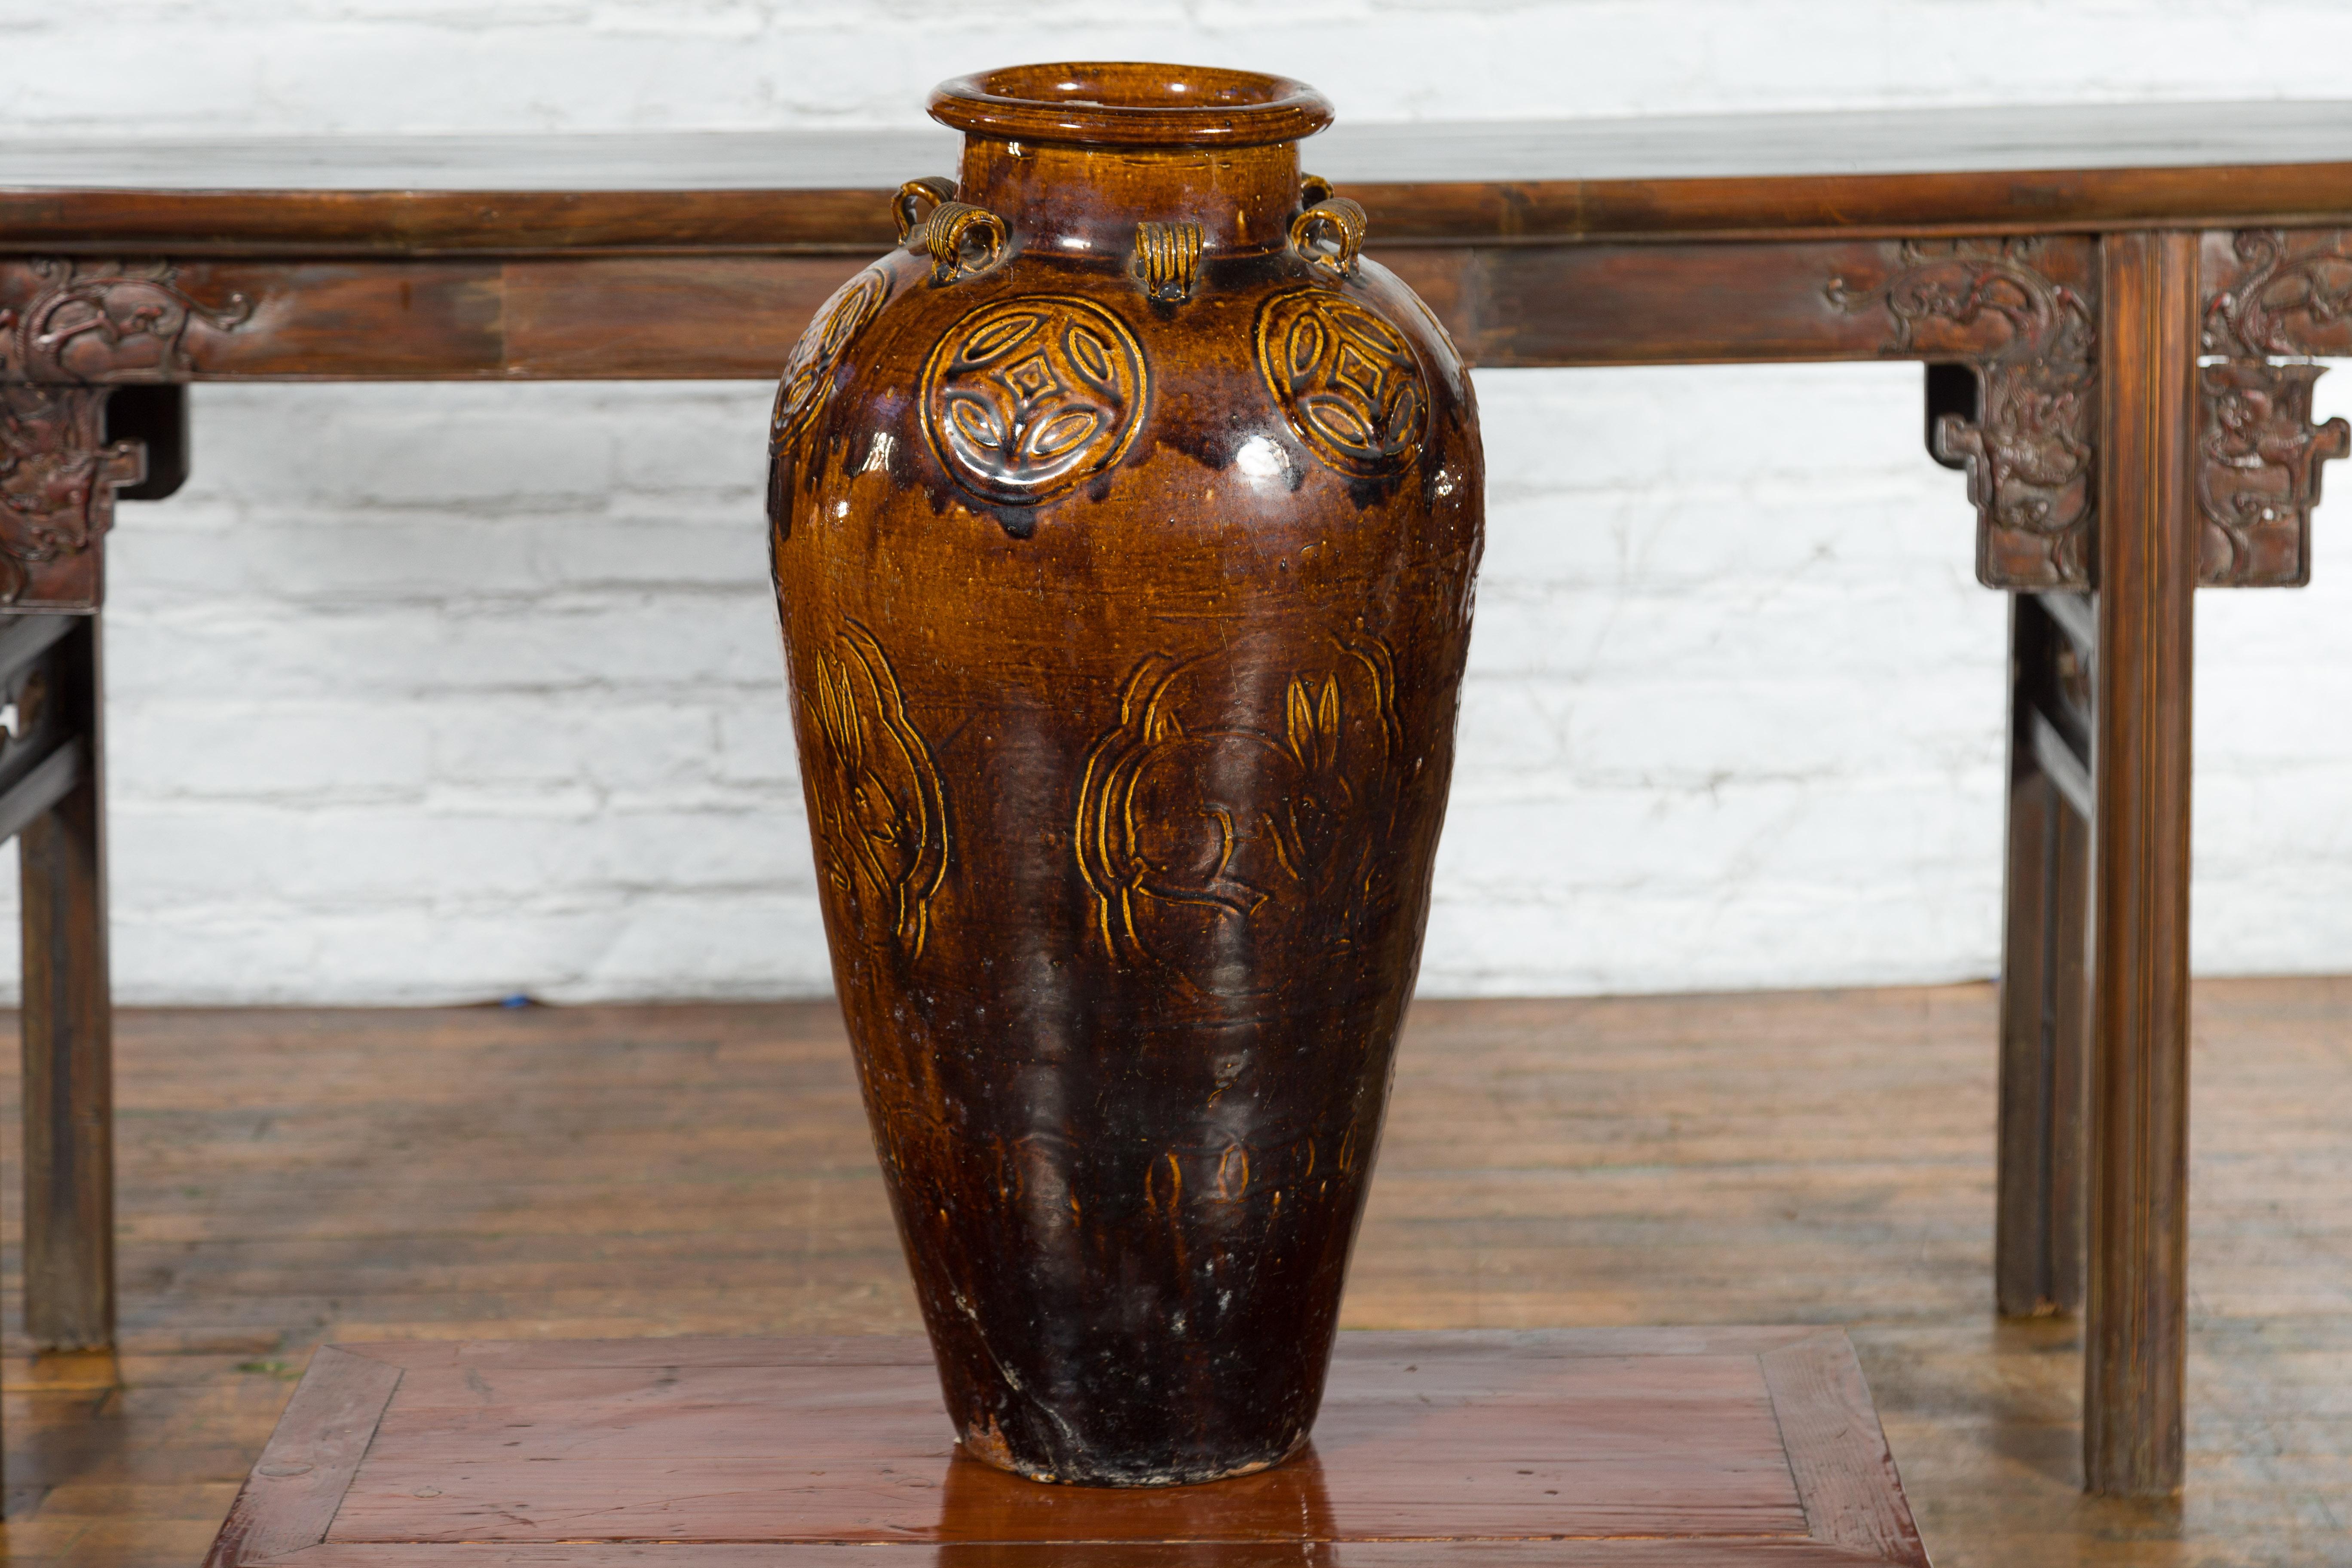 A large antique Chinese Qing Dynasty period brown glazed jar from the 19th century with petite loop handles, geometric medallions and rabbit motifs. Created in China during the 19th century, this vase features a narrow neck topped by a thick lip